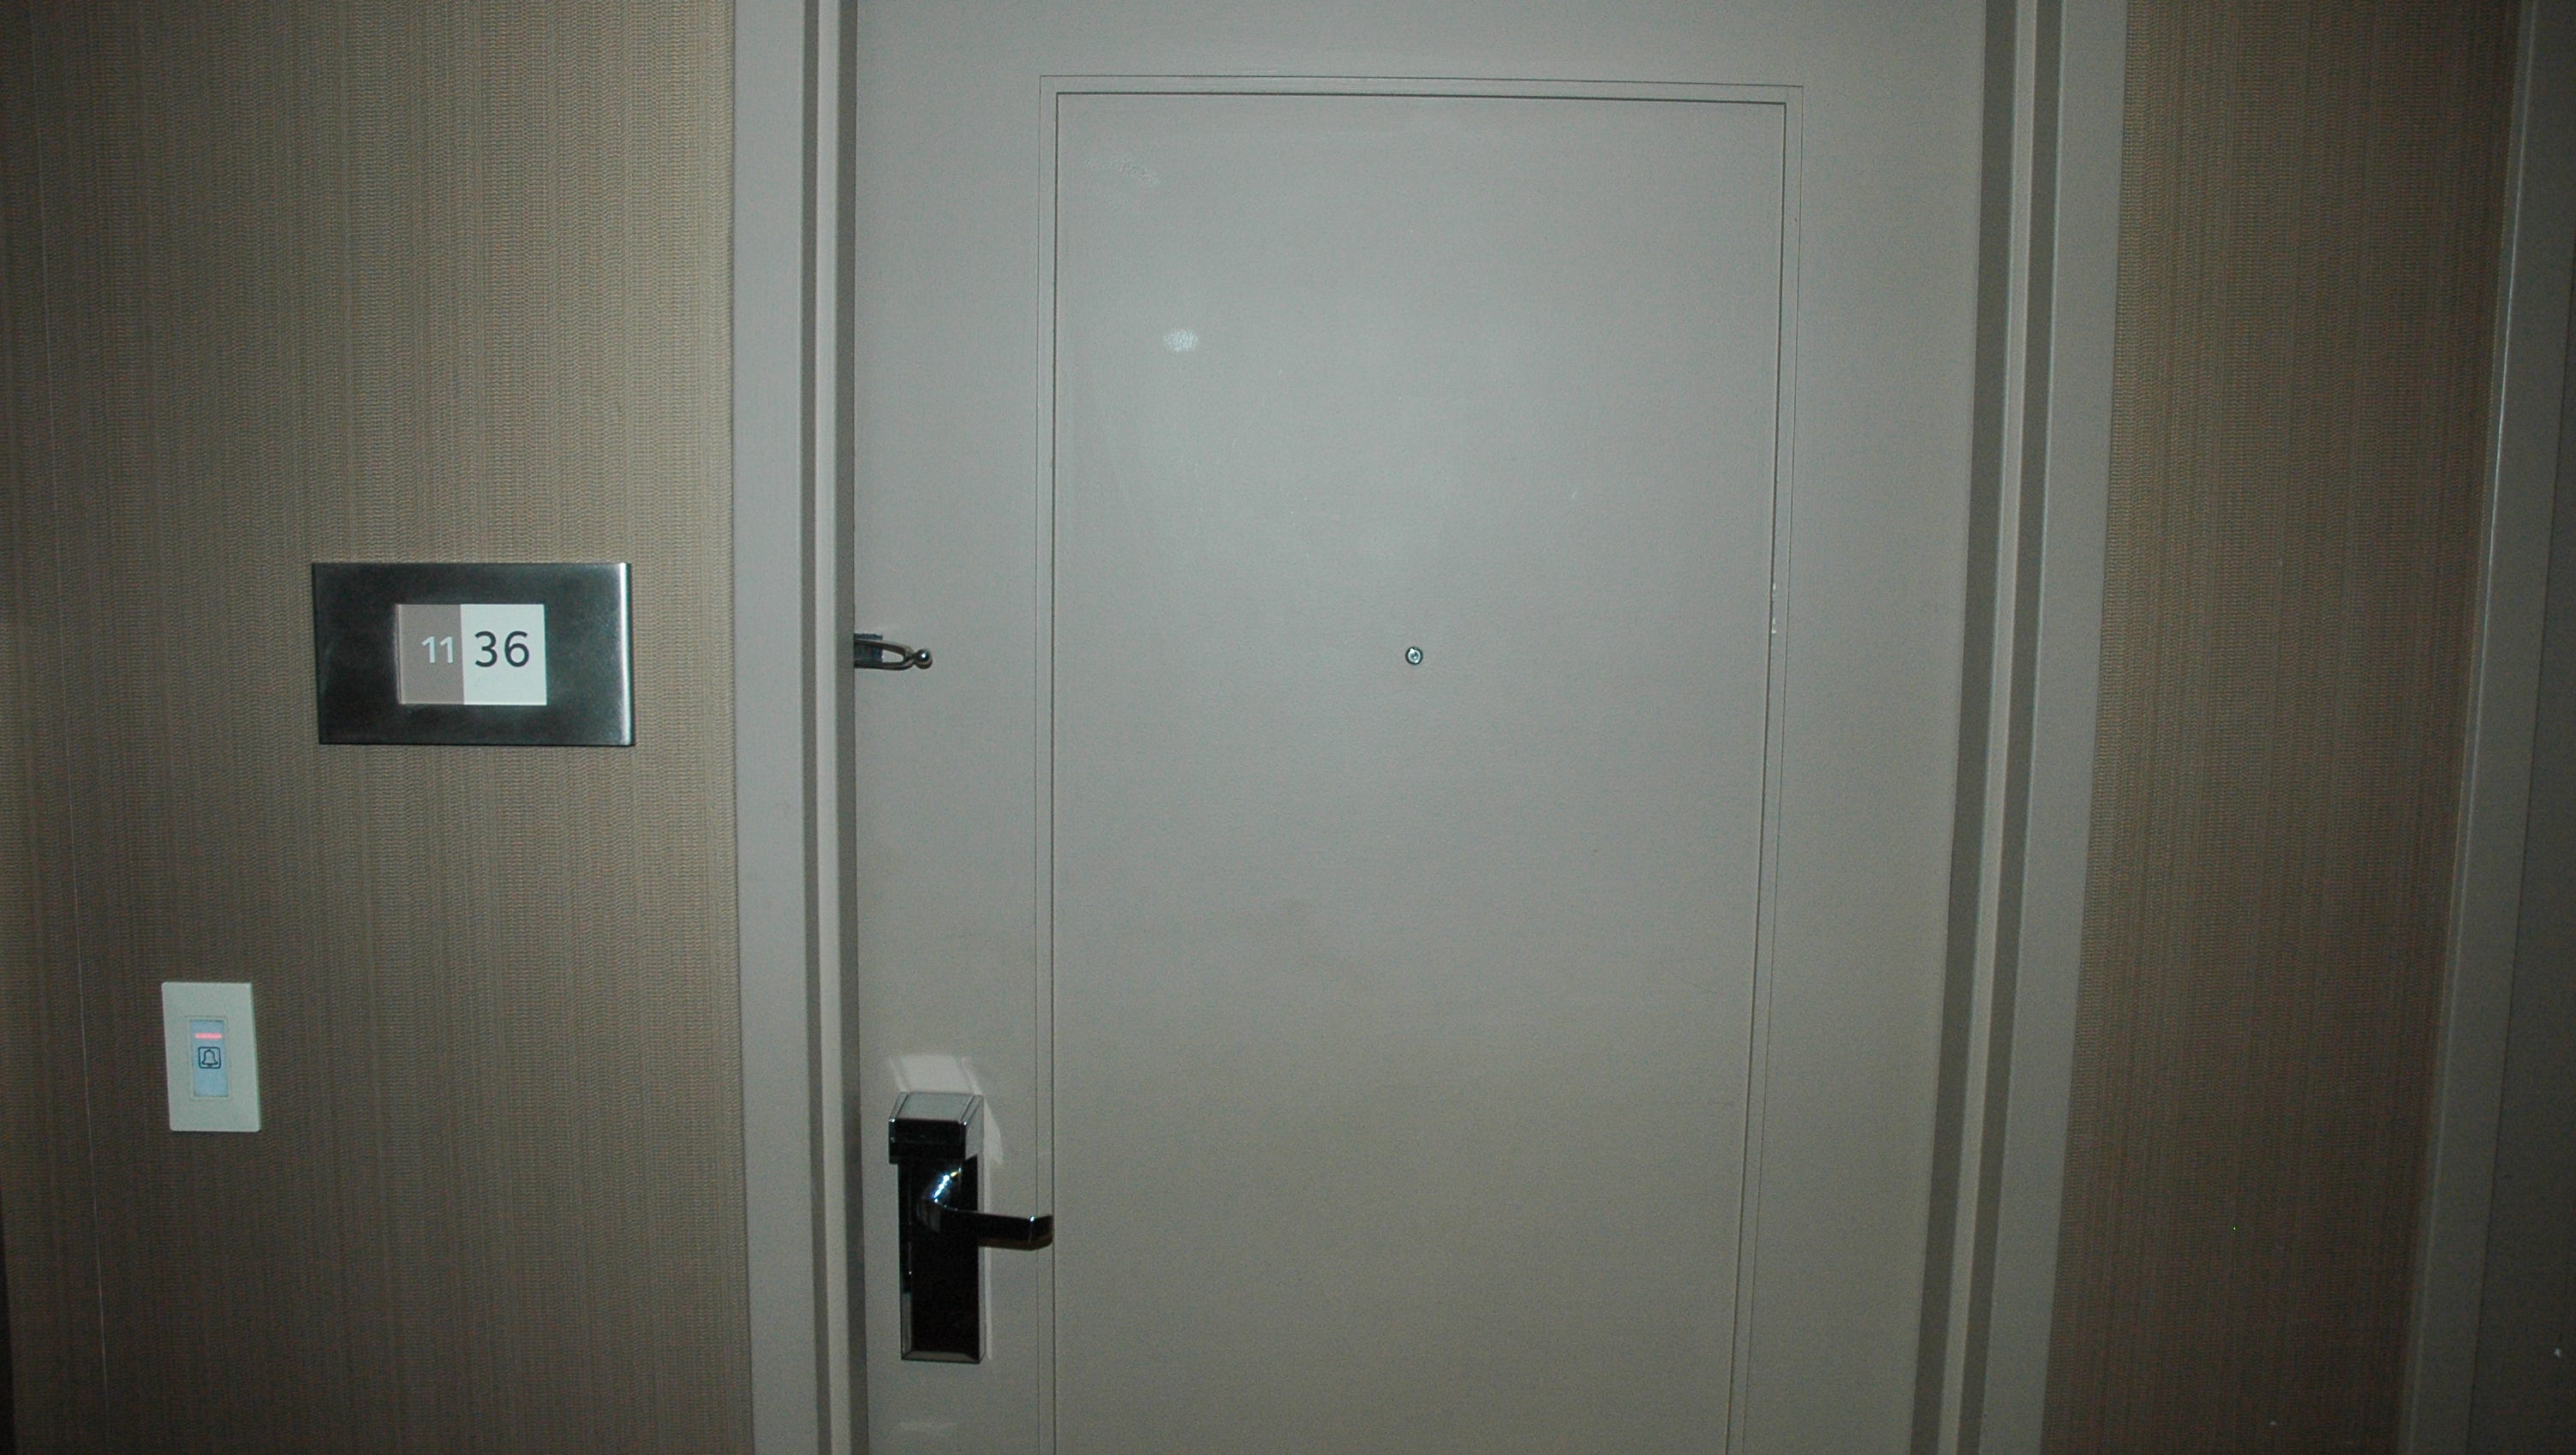 A photo of the outer door to Cornell's hotel room.